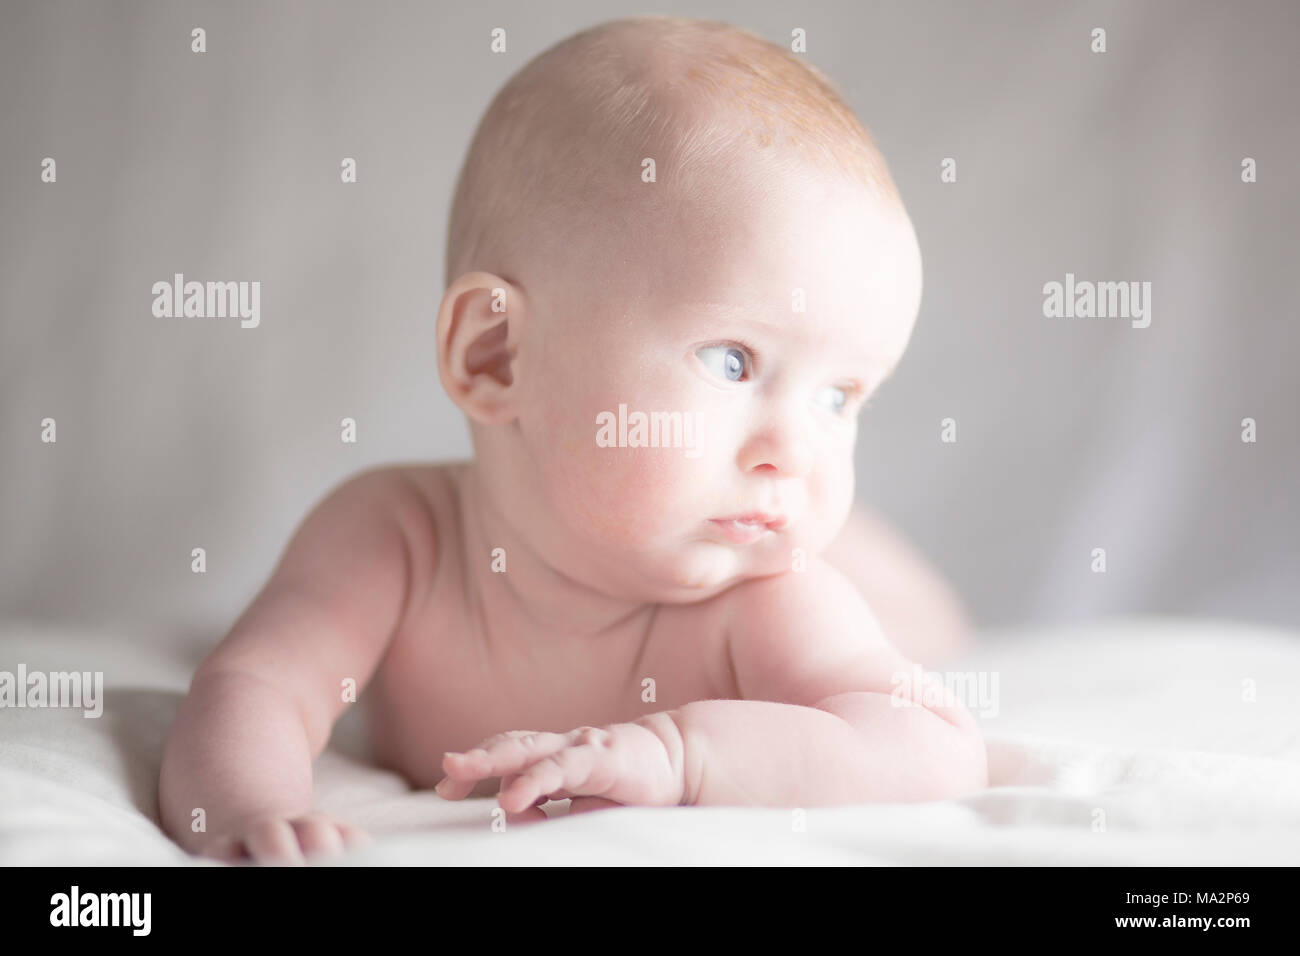 Very cute baby boy looking towards the light with contemplative ...